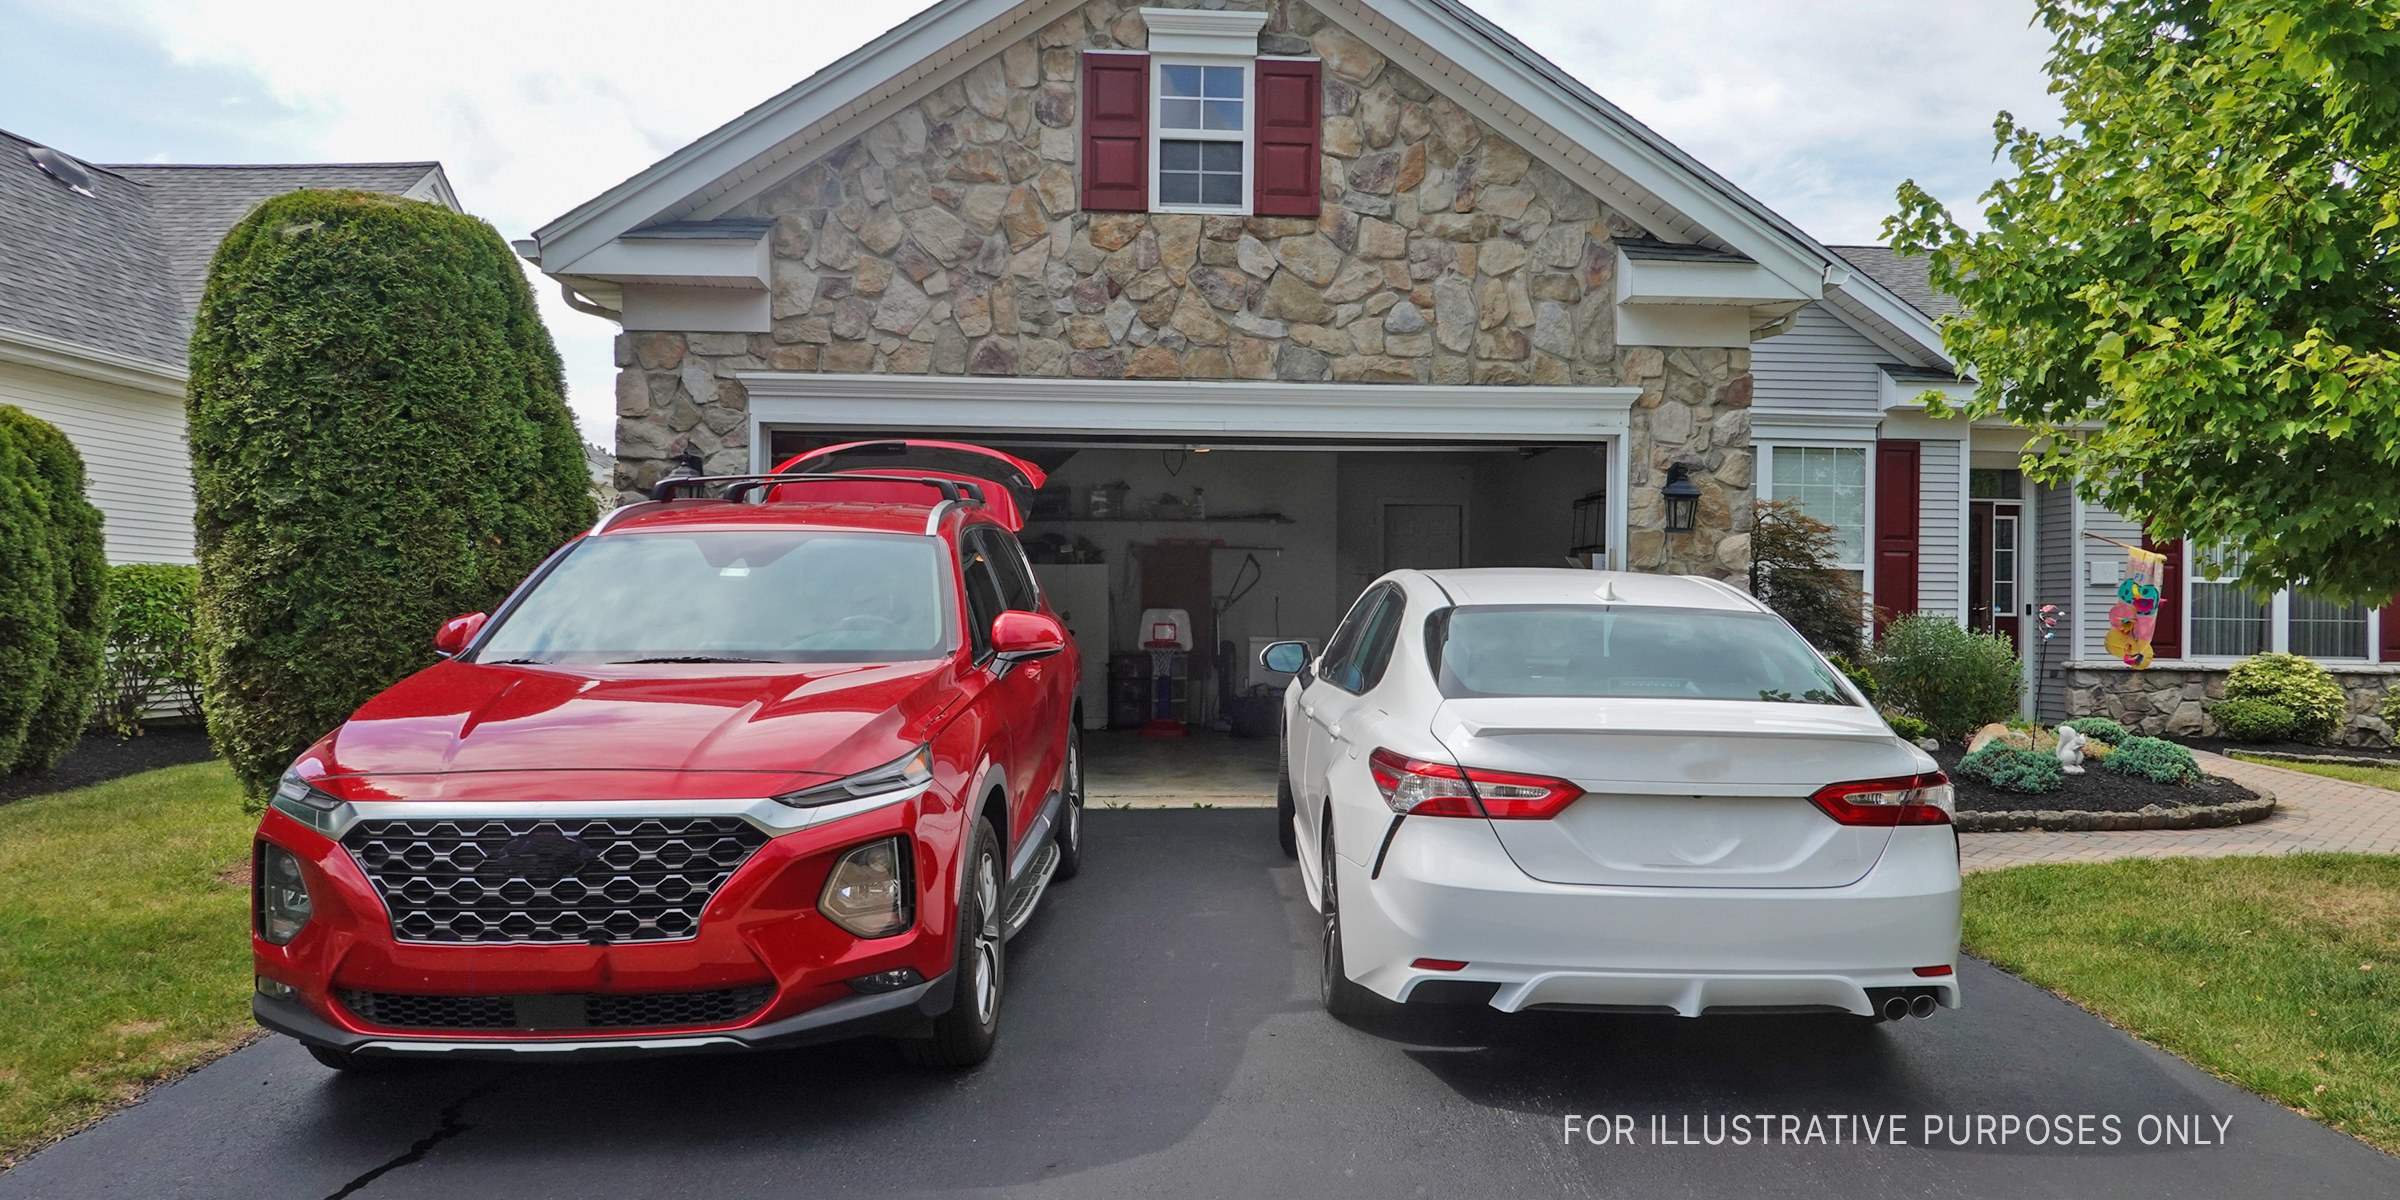 A red SUV and a white sedan parked in a driveway | Source: Shutterstock